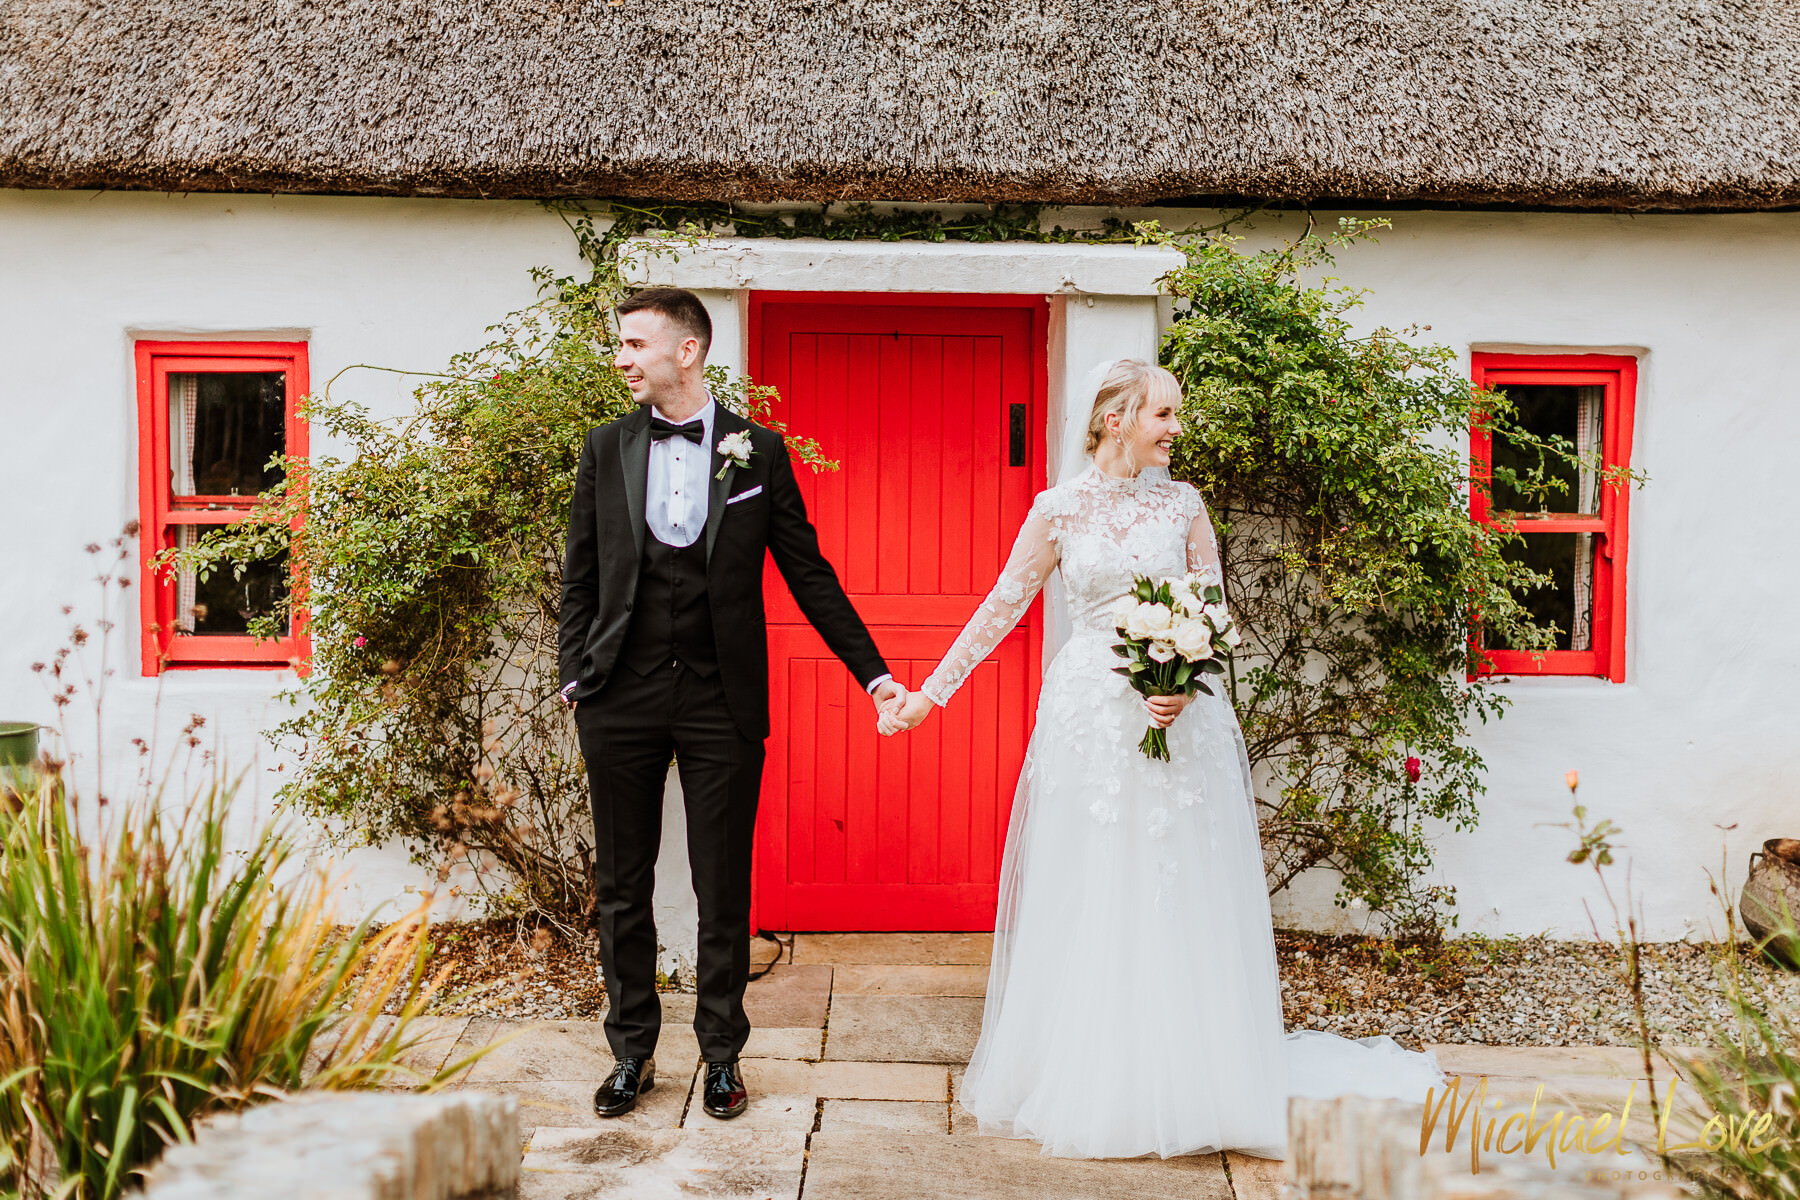 Bridal couple outside cottage with thatched roof & red door